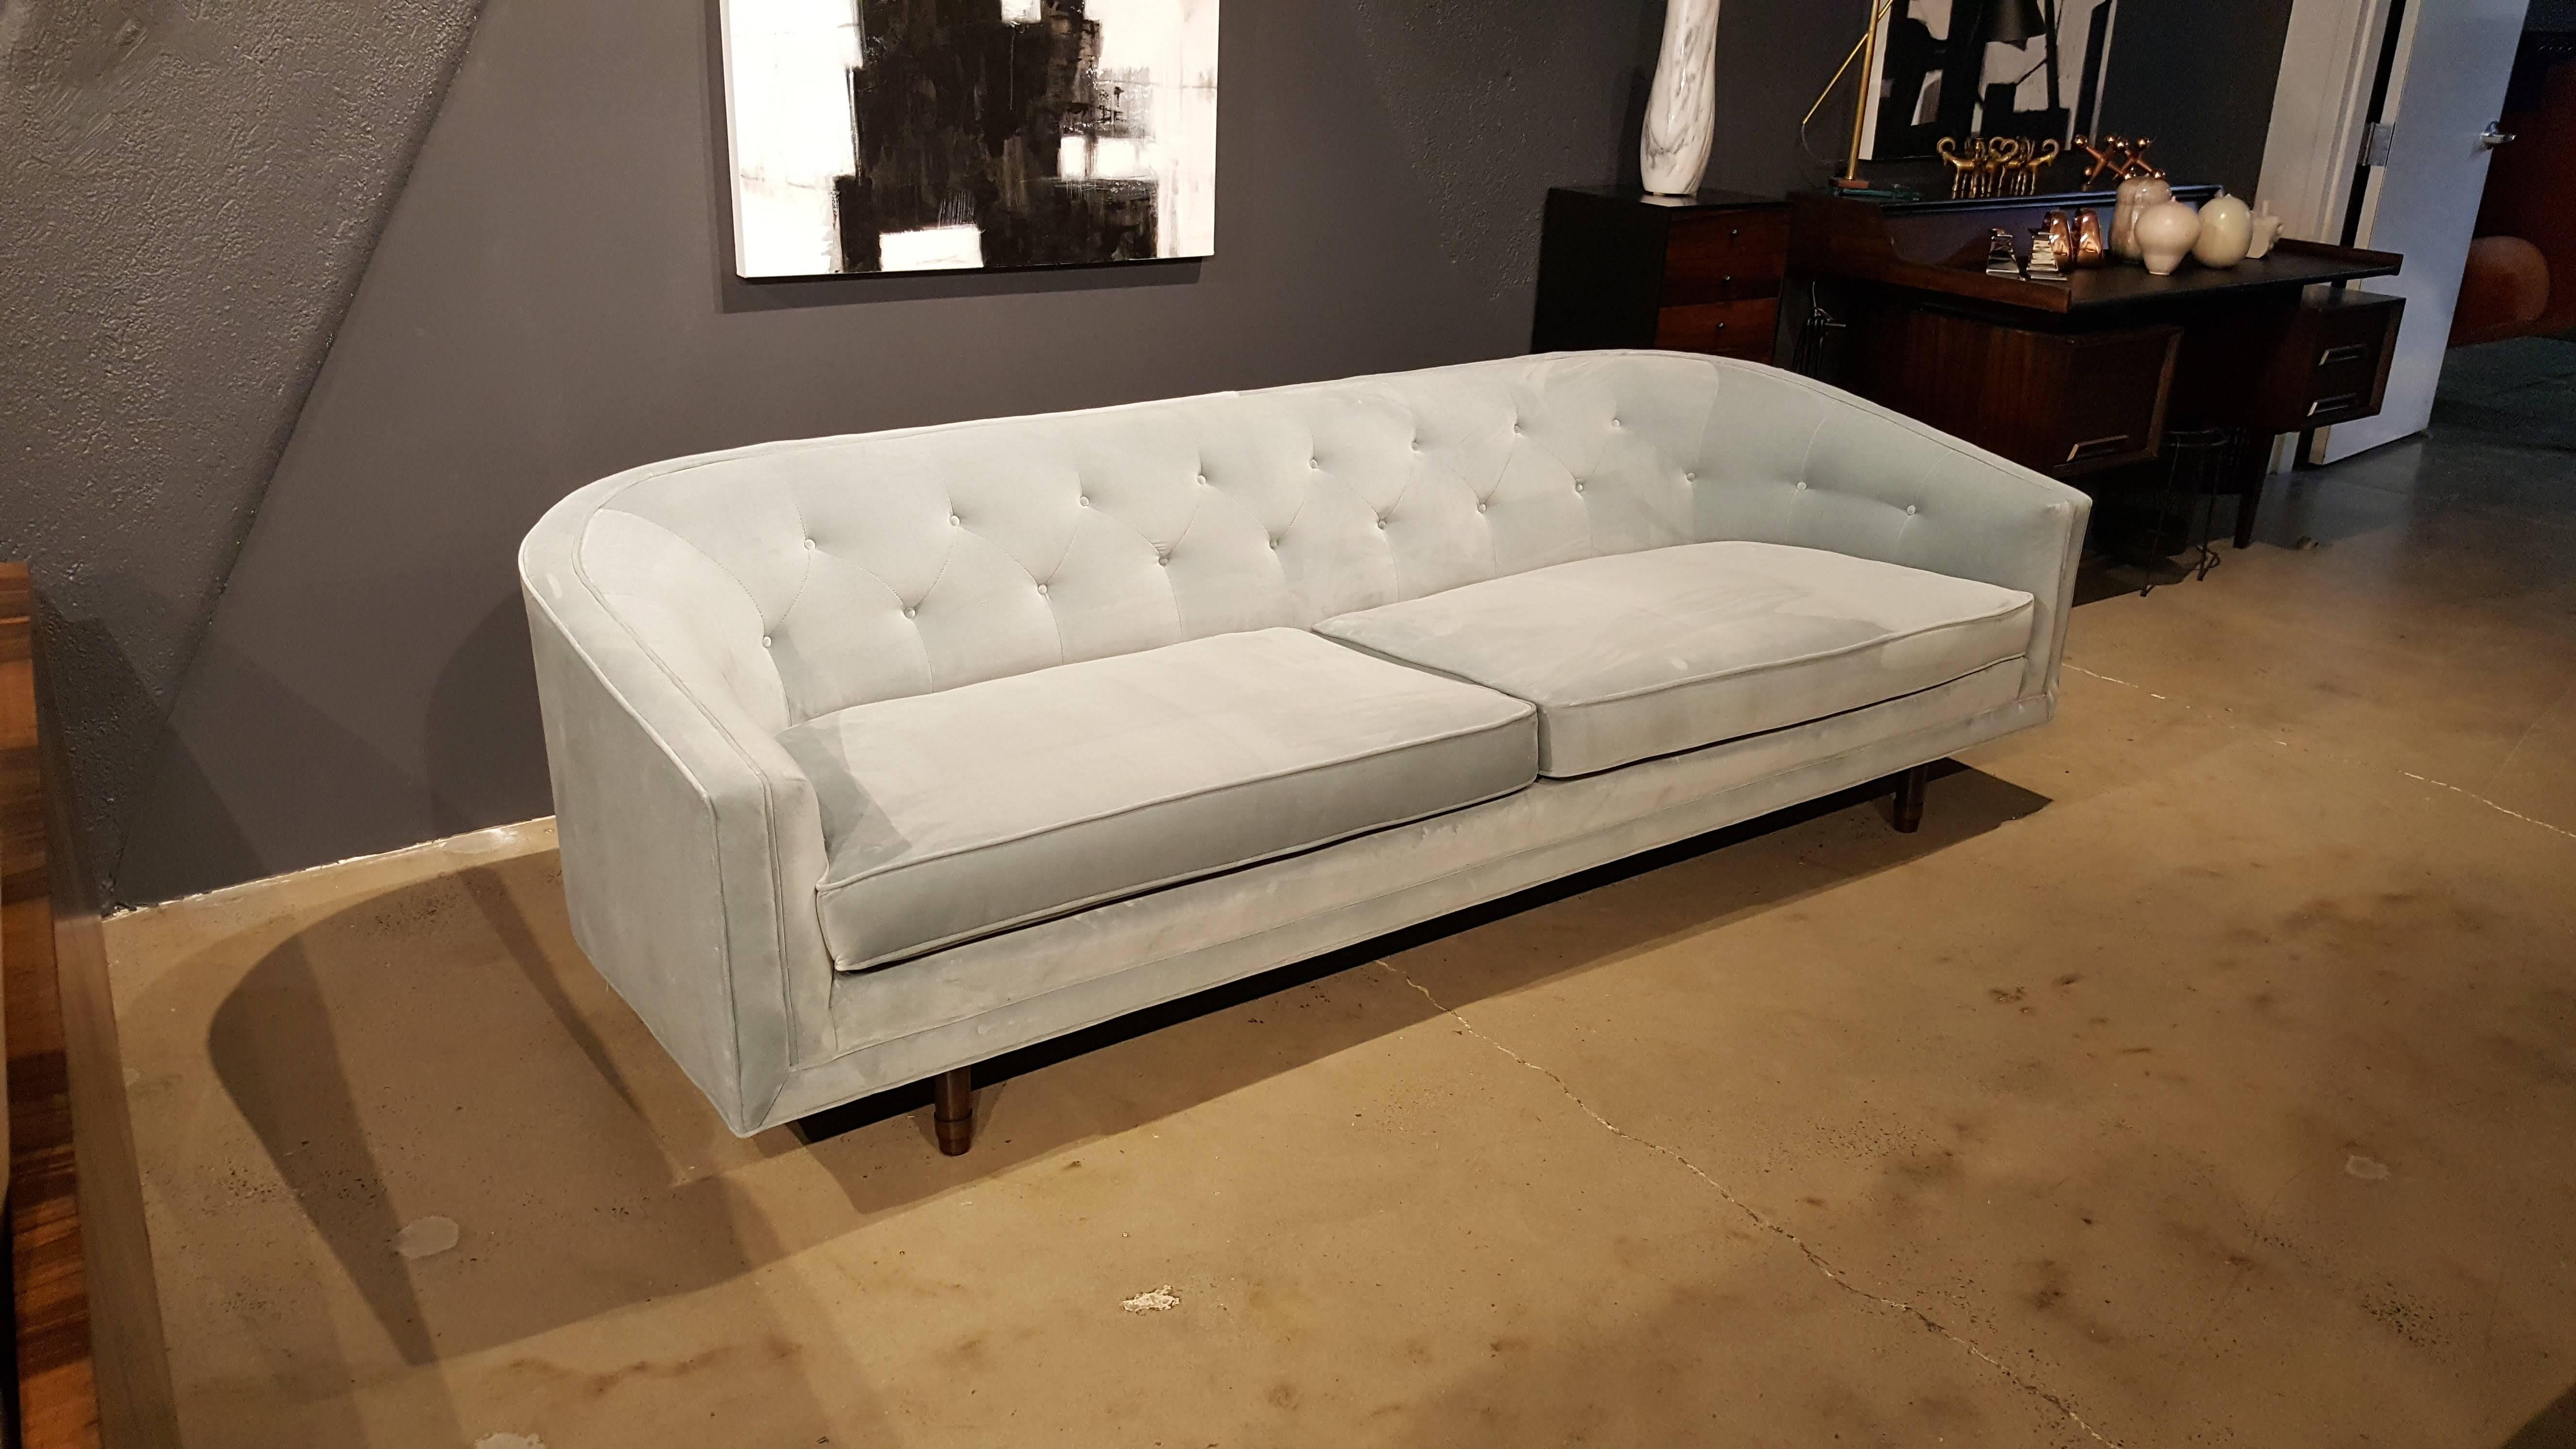 Elegant, sleek sofa by Selig in pale dove blue grey cotton velvet with exposed walnut legs. Beautiful button tufting detail gives this piece the feeling of a Danish Modern Chesterfield quite lovely. Clean lines and gorgeous curve from back to arm.